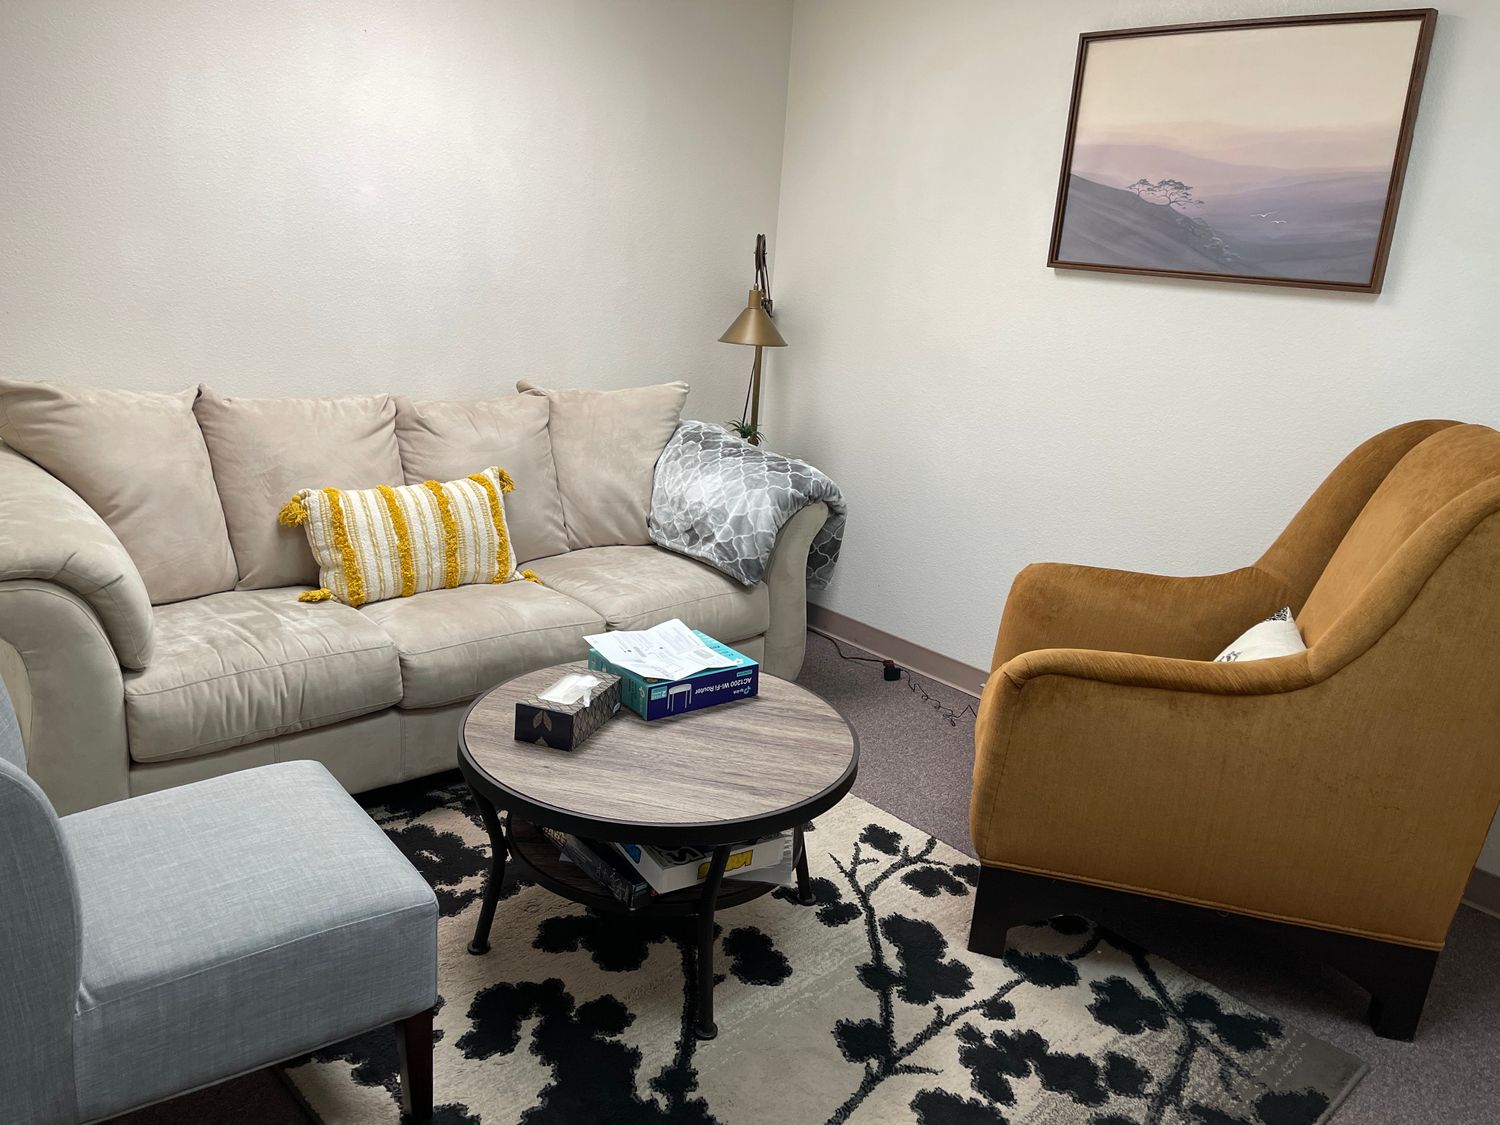 Gallery Photo of Therapy Room